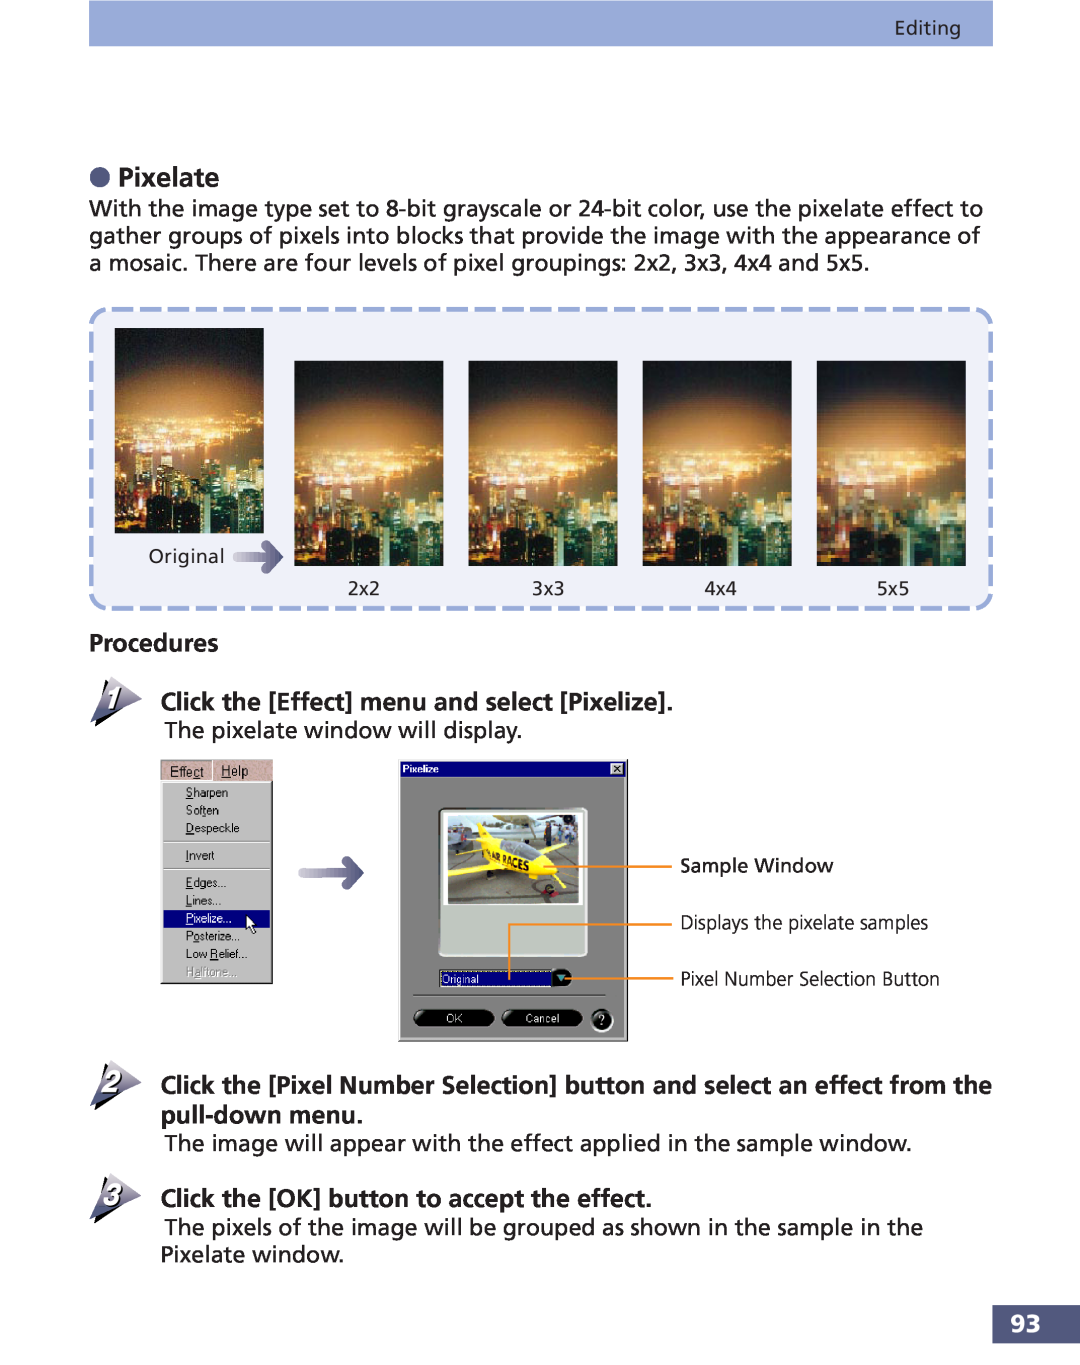 Canon FS 3.6 Pixelate, Procedures Click the Effect menu and select Pixelize, Click the OK button to accept the effect 